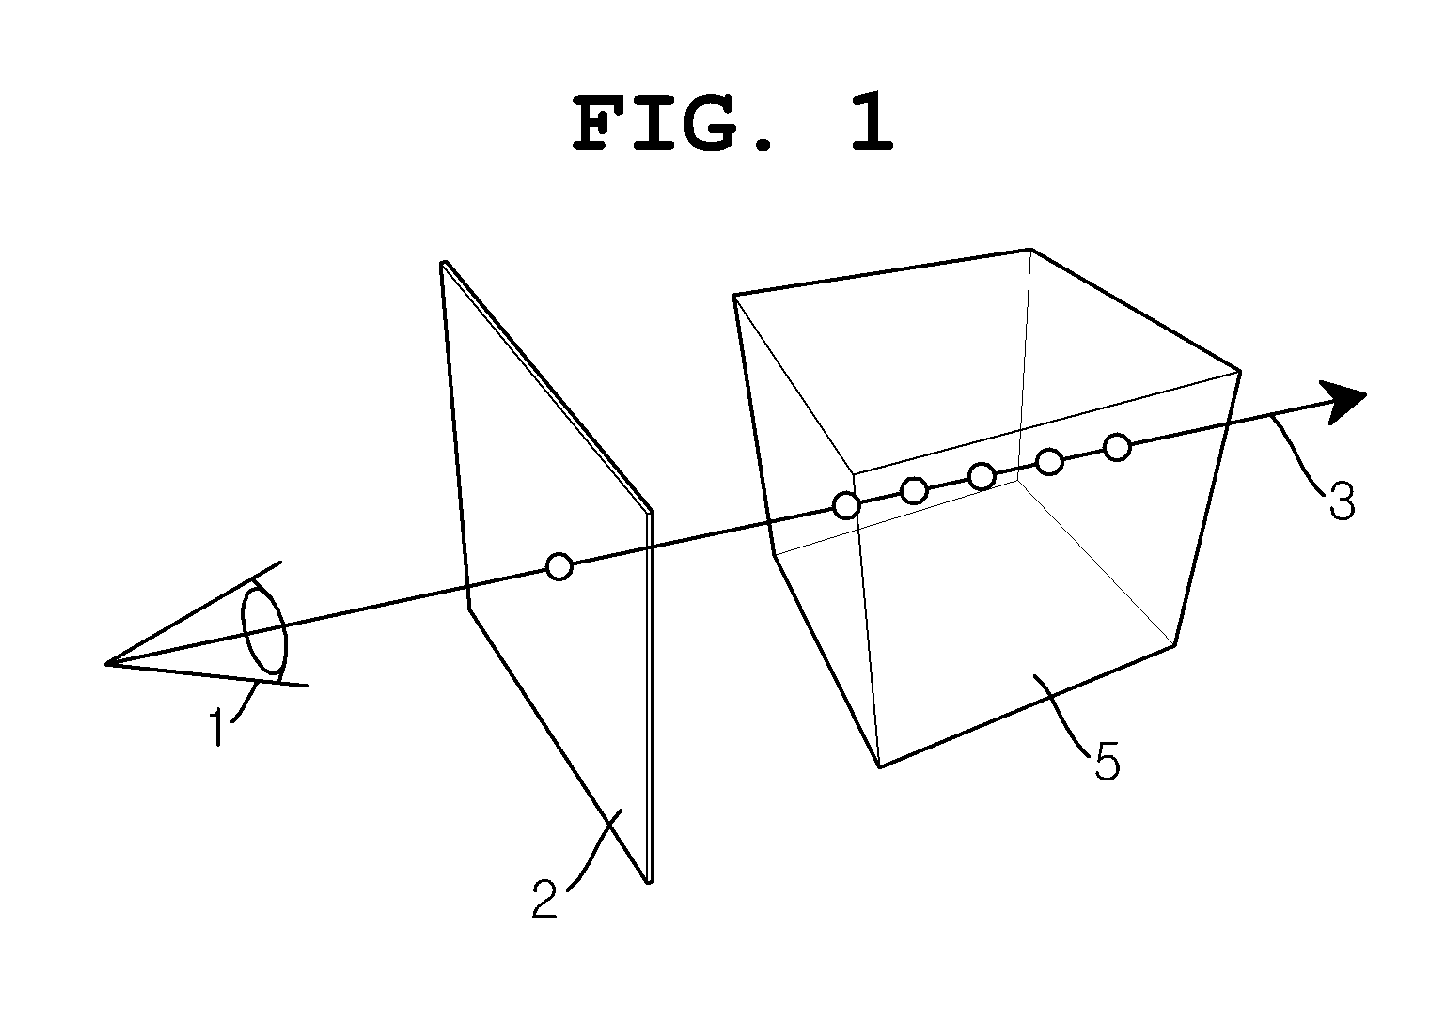 Processor and method for accelerating ray casting